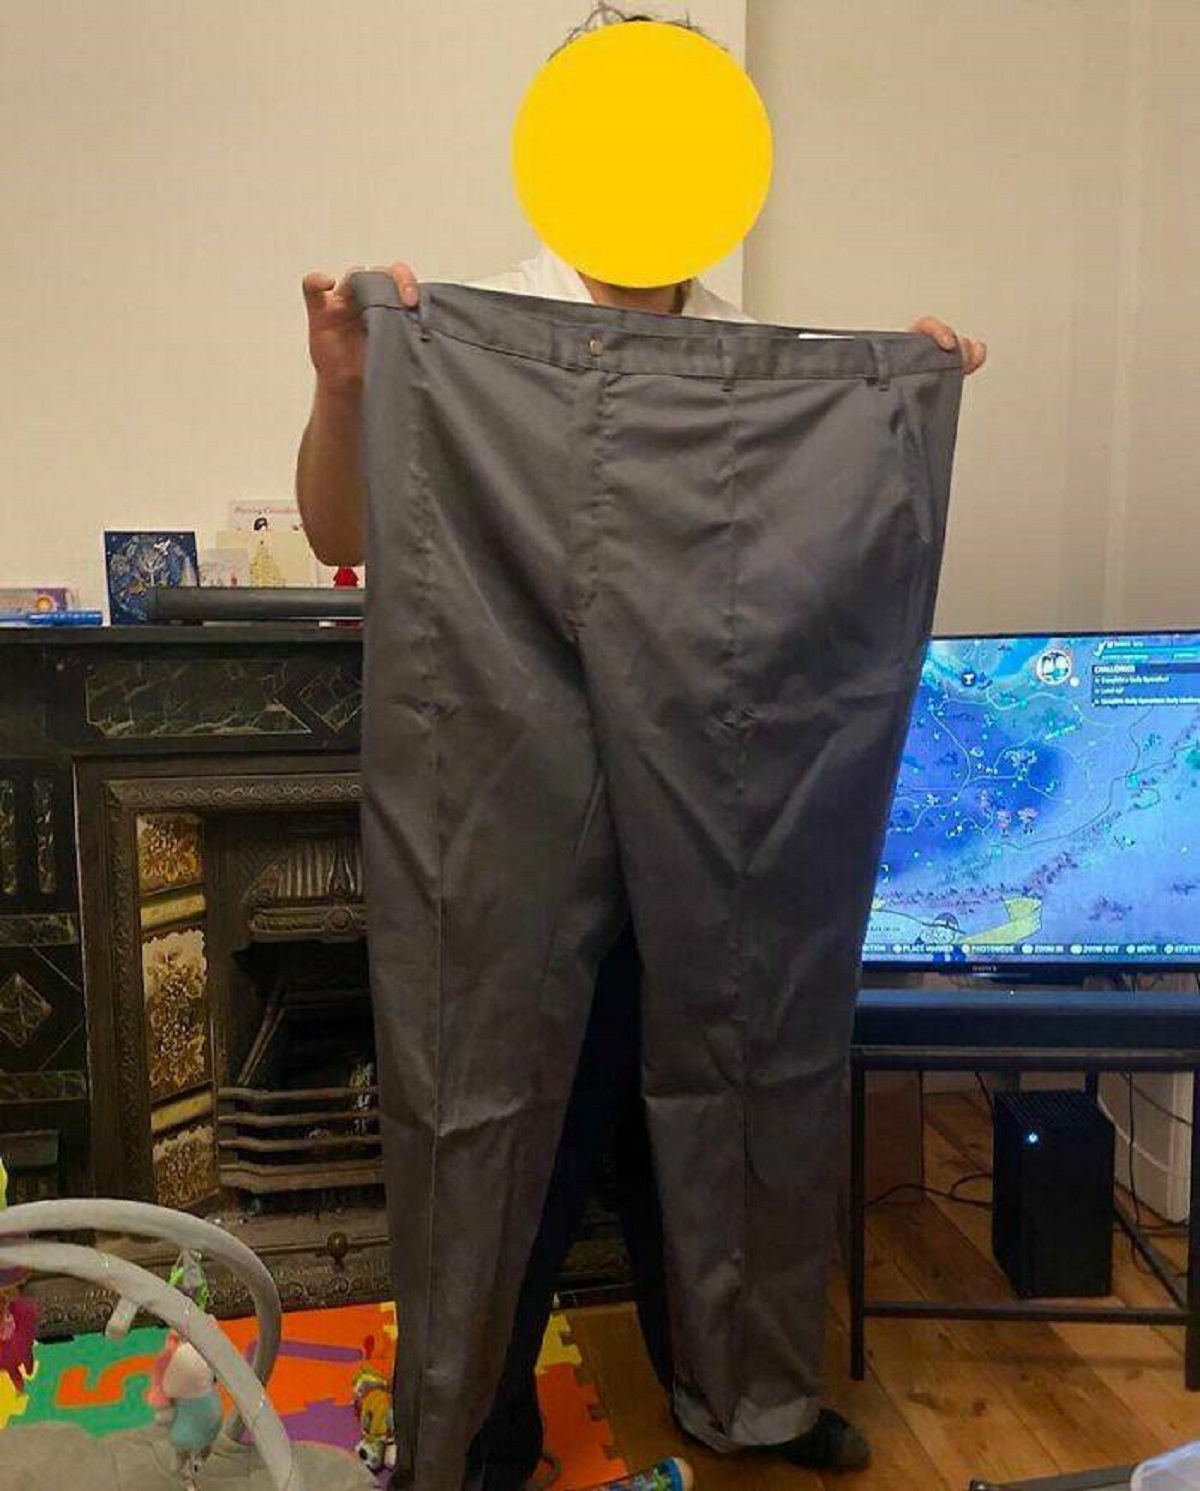 "My 6-Feet Husband Started A New Job, This Is The Uniform They Gave Him. And It Is My Fault As I Took The Measurements. Even His Boss Ended Up Laughing"